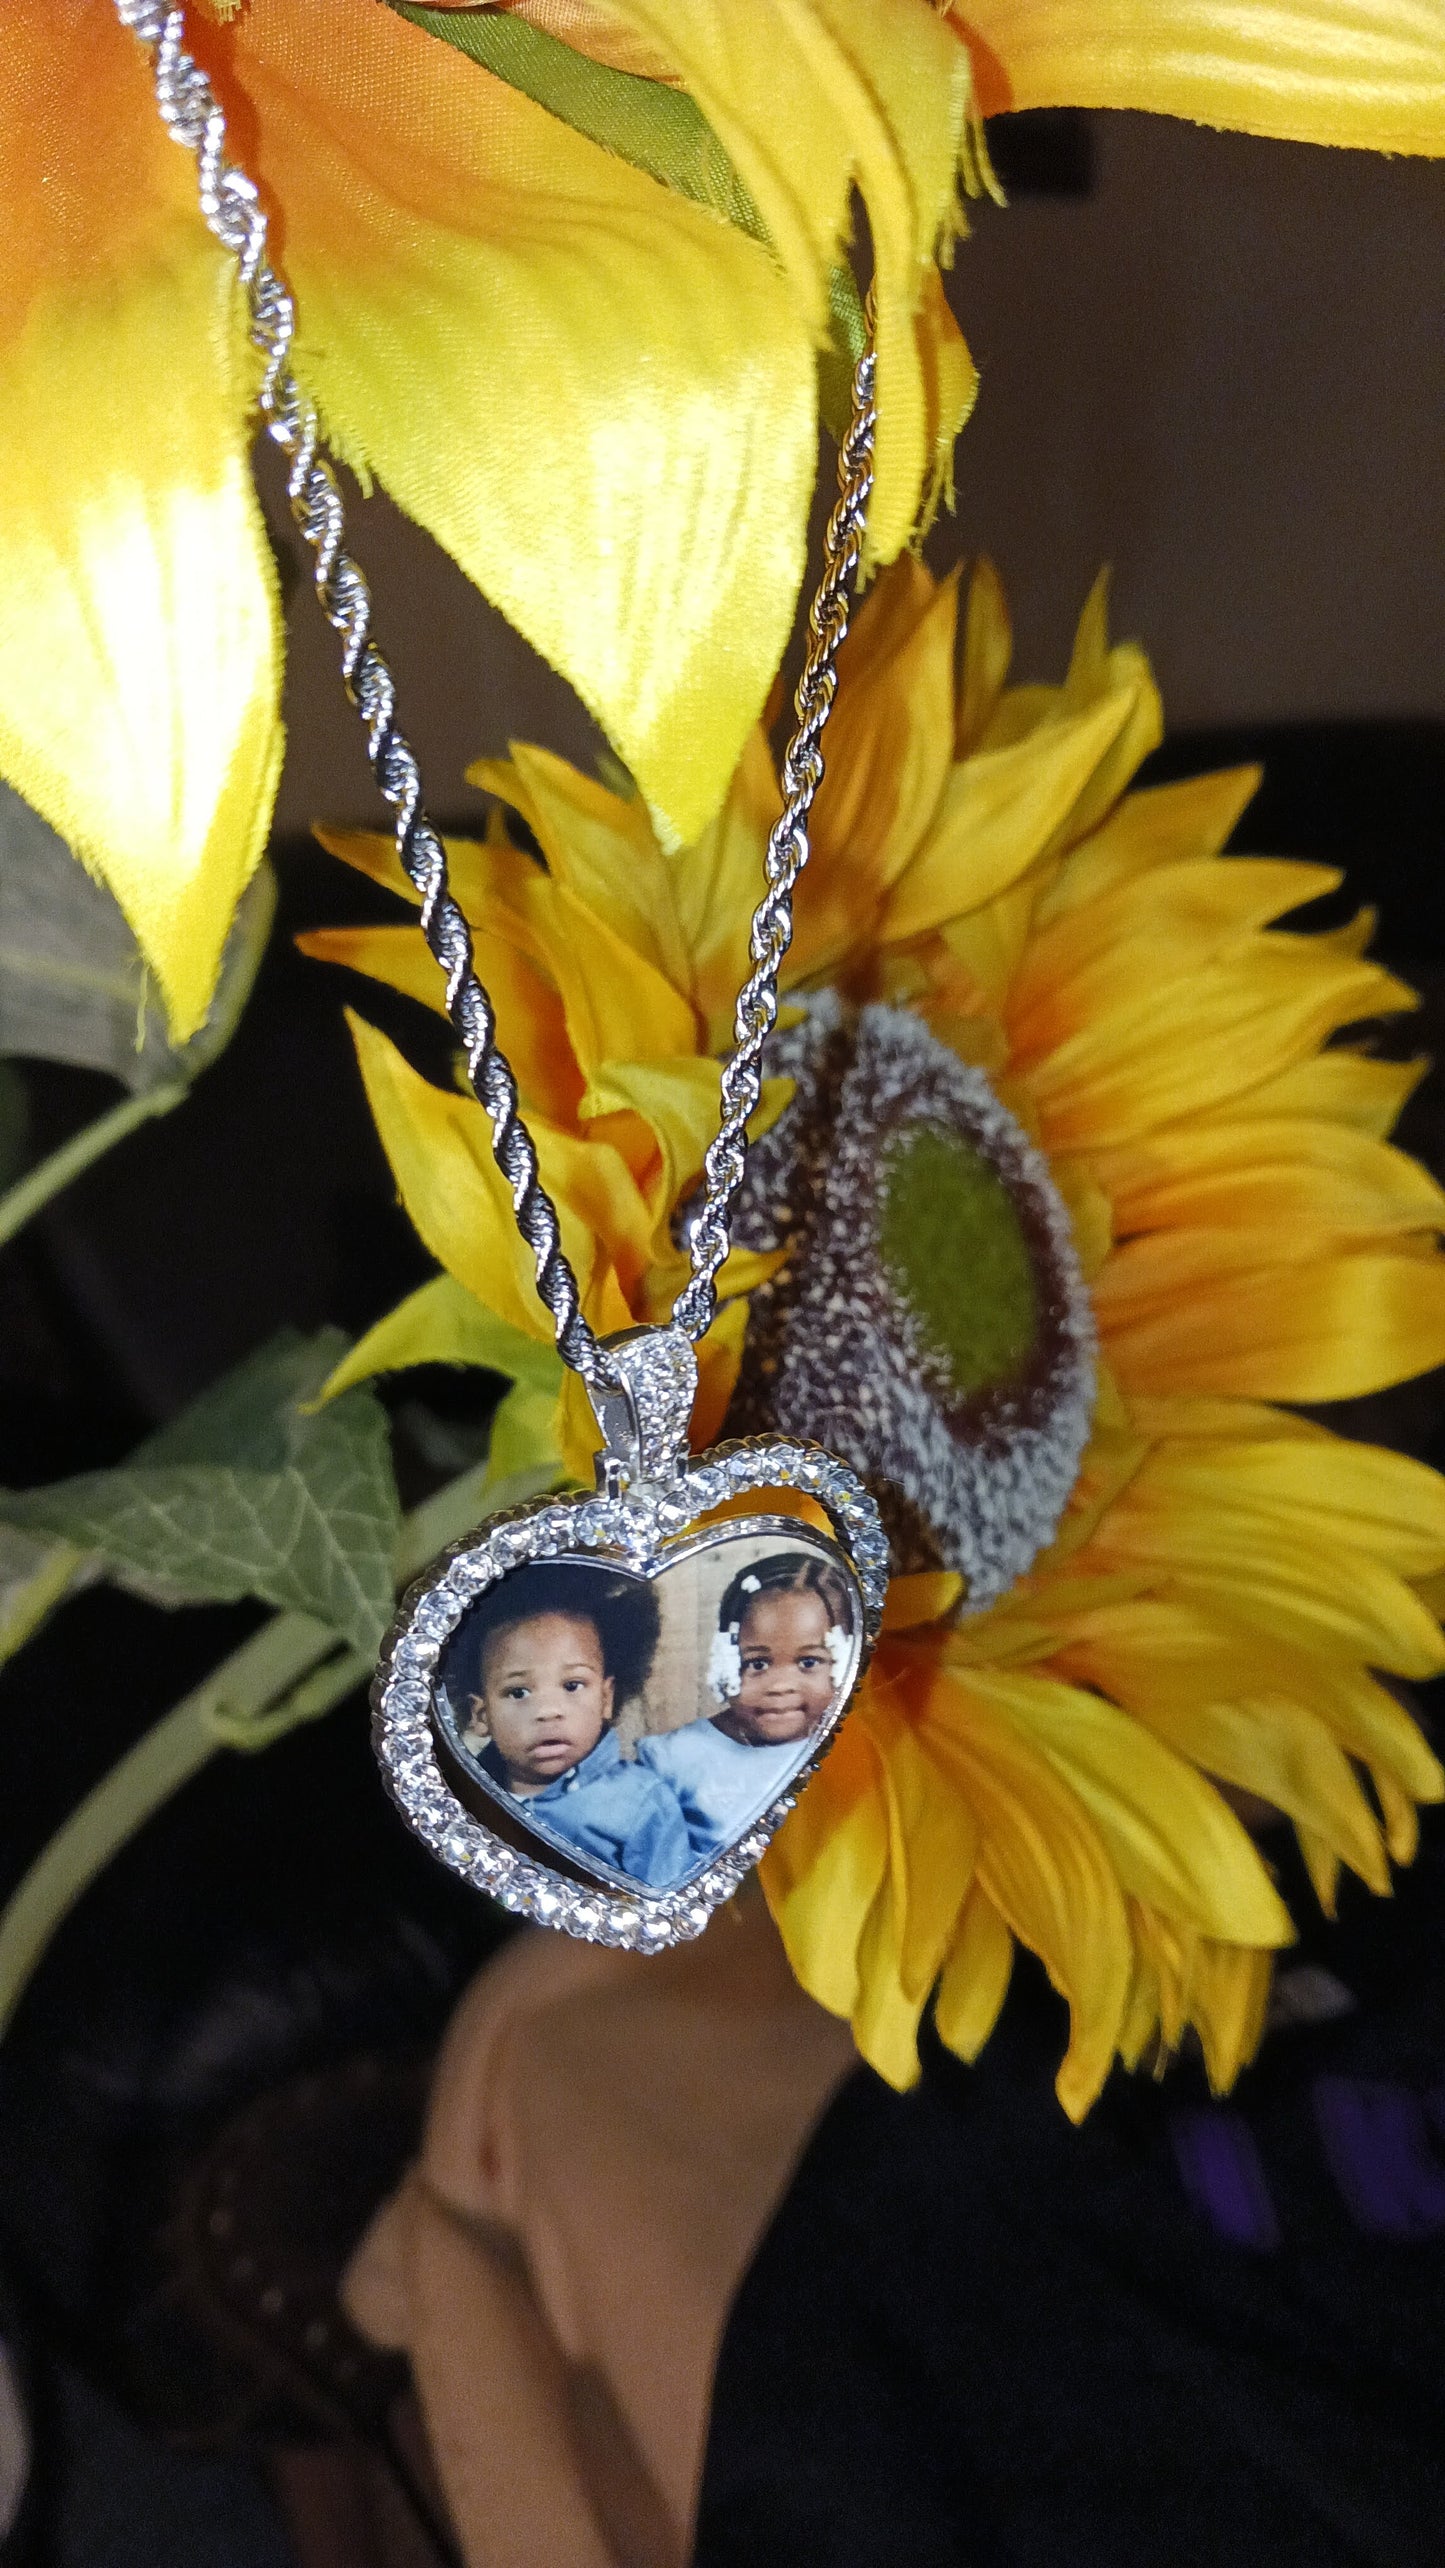 Personalized Rotating Picture Pendant Necklace